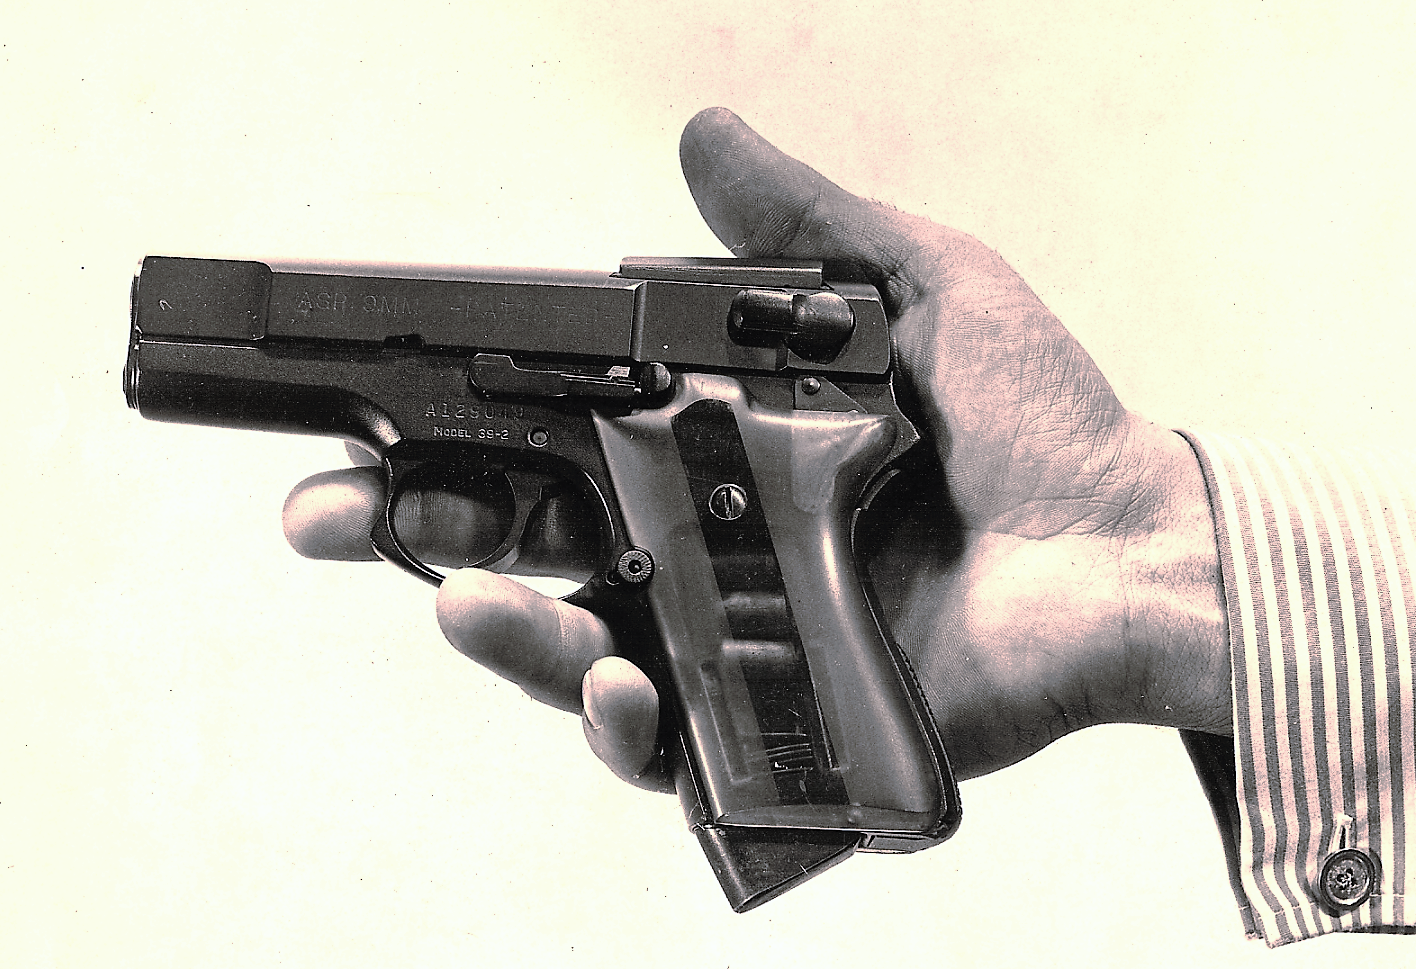 Cold War Mystery Pistol? The Story of the Revolutionary 9mm ASP